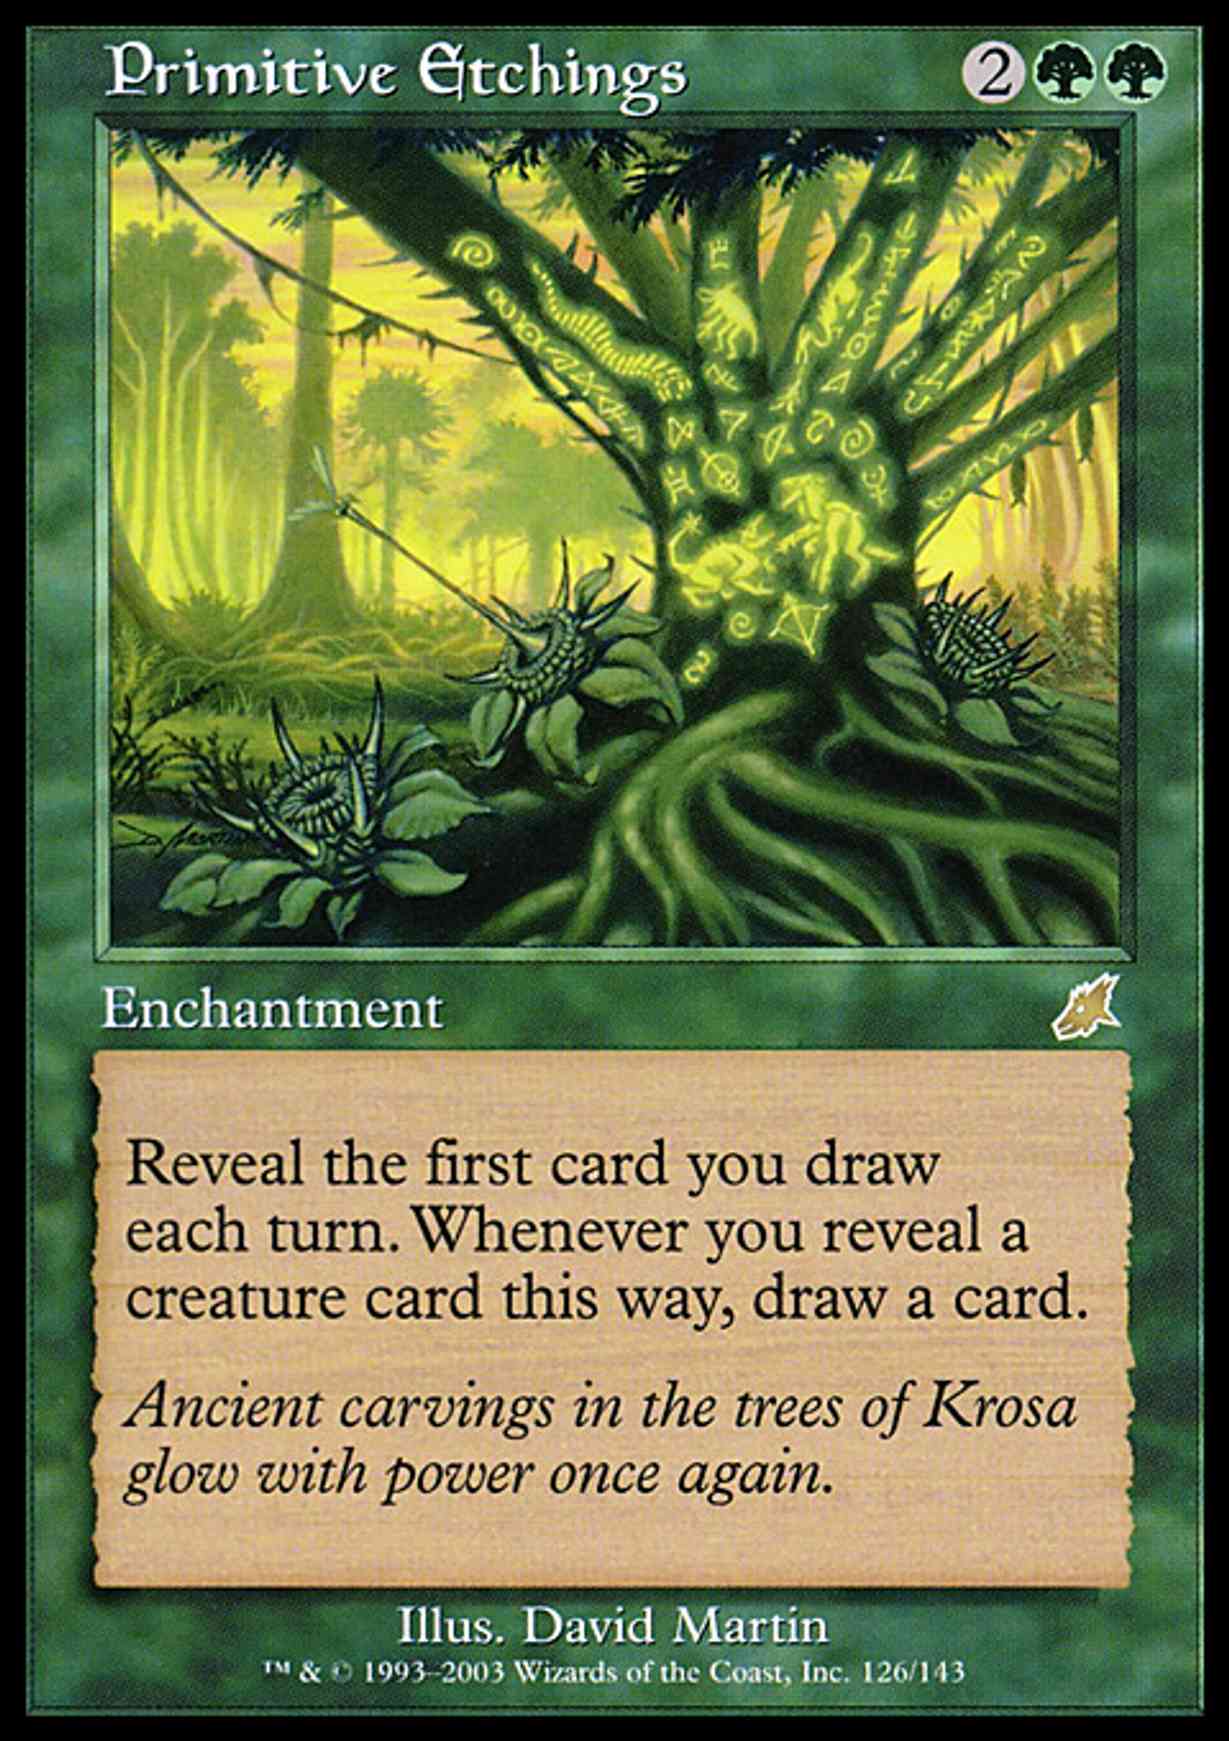 Primitive Etchings magic card front